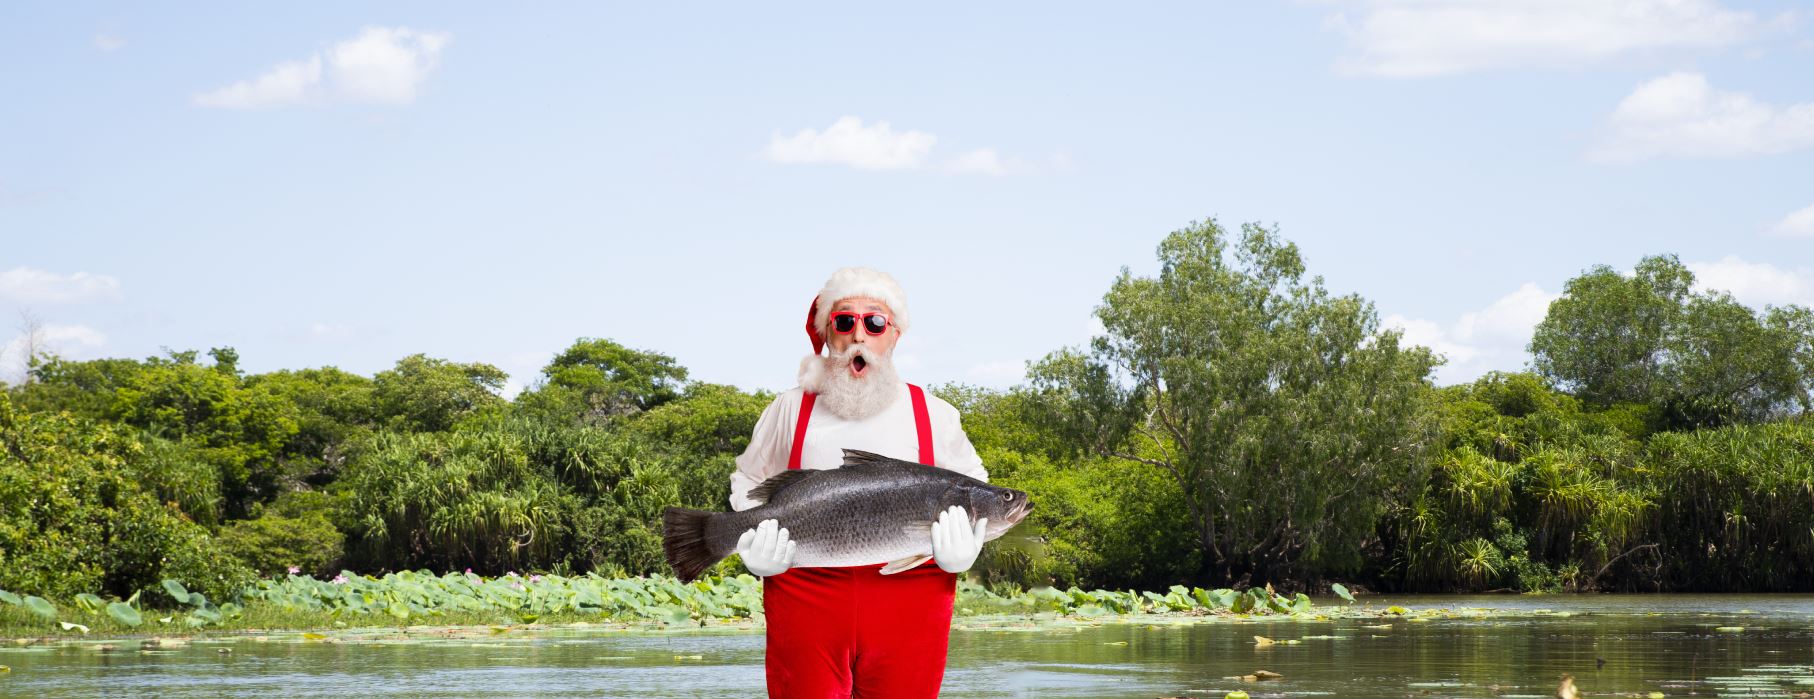 Size Matters this Christmas in Territory fishing competition